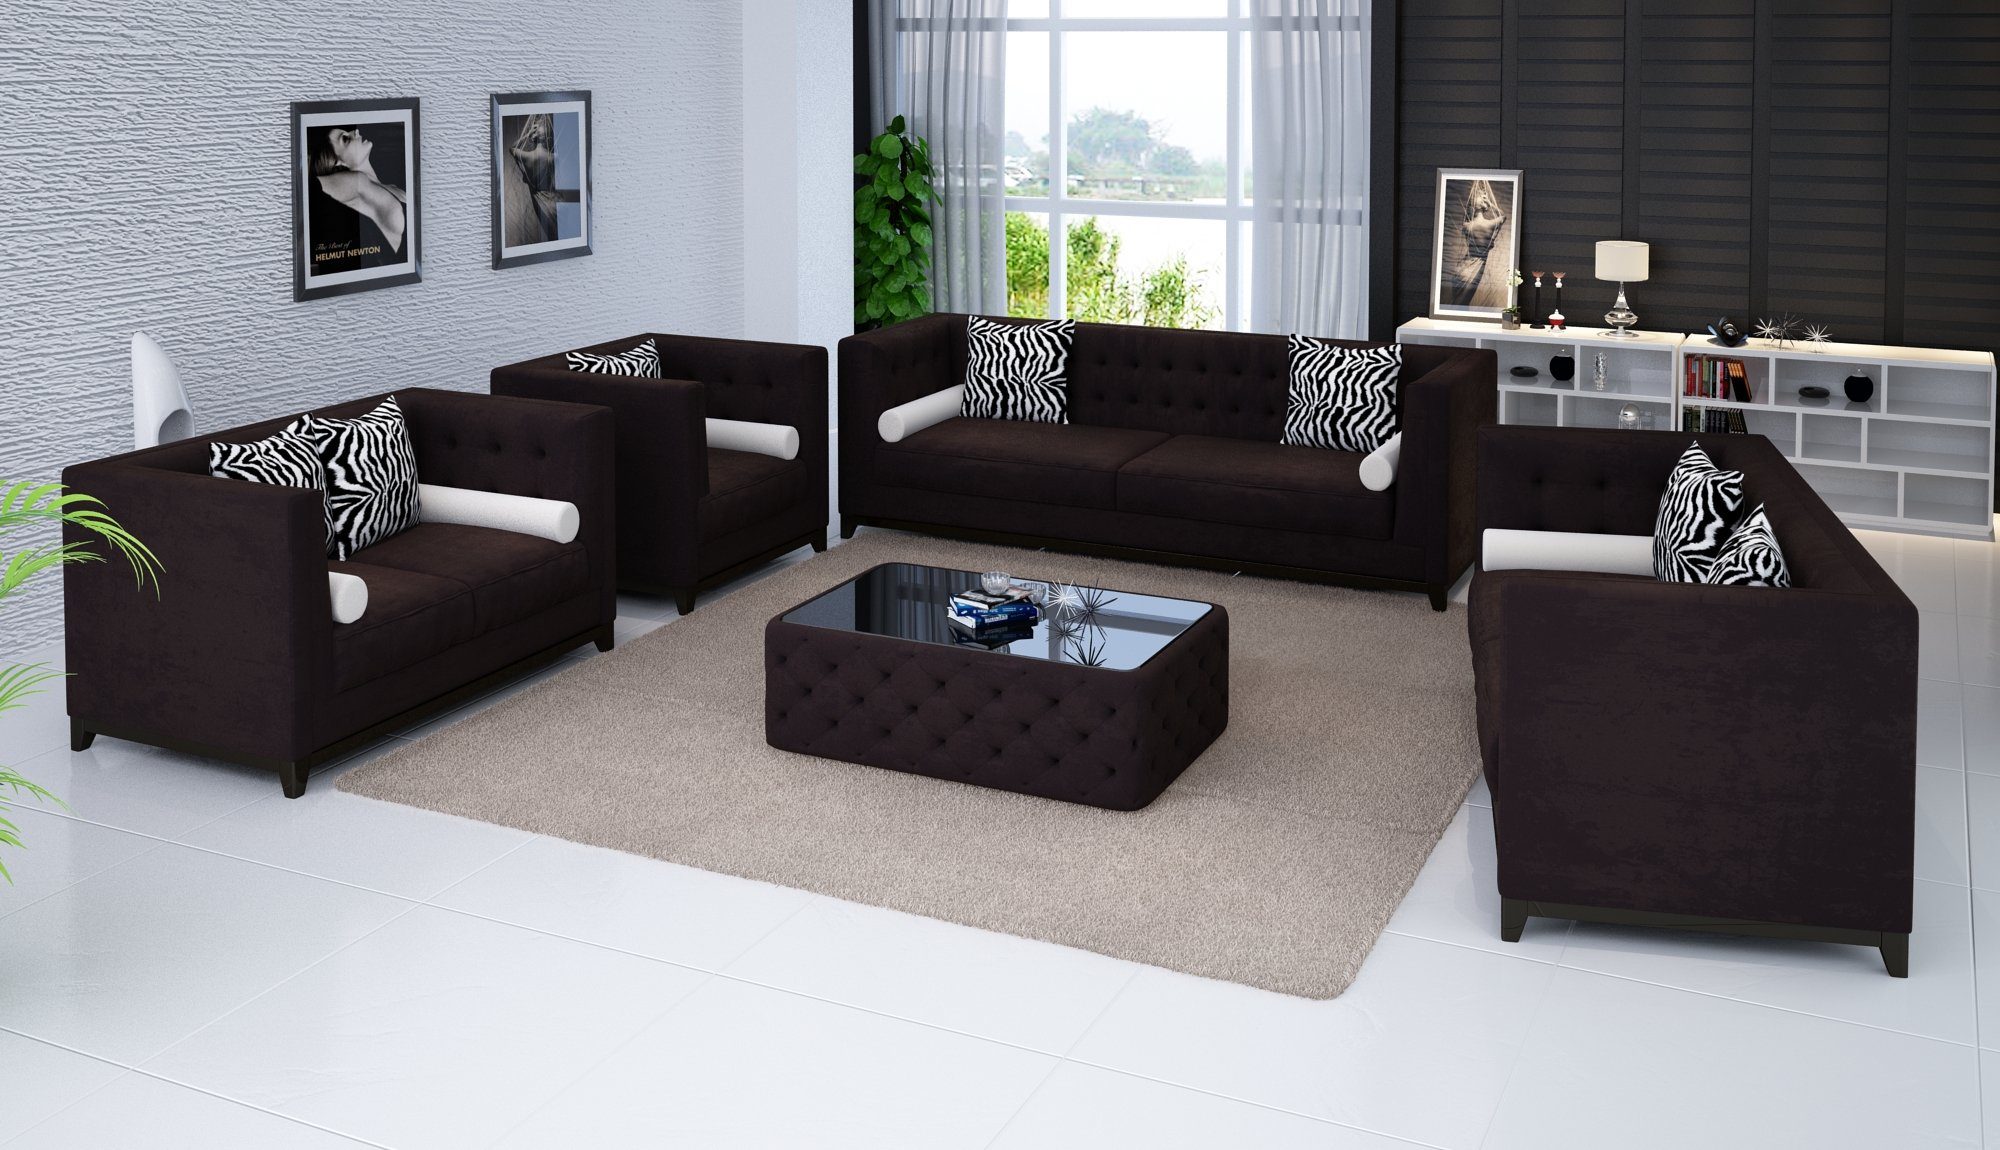 JVmoebel Sofa Rote Chesterfield Sofagarnitur Sofa Couchen Couch 3tlg Sessel, Made in Europe Braun